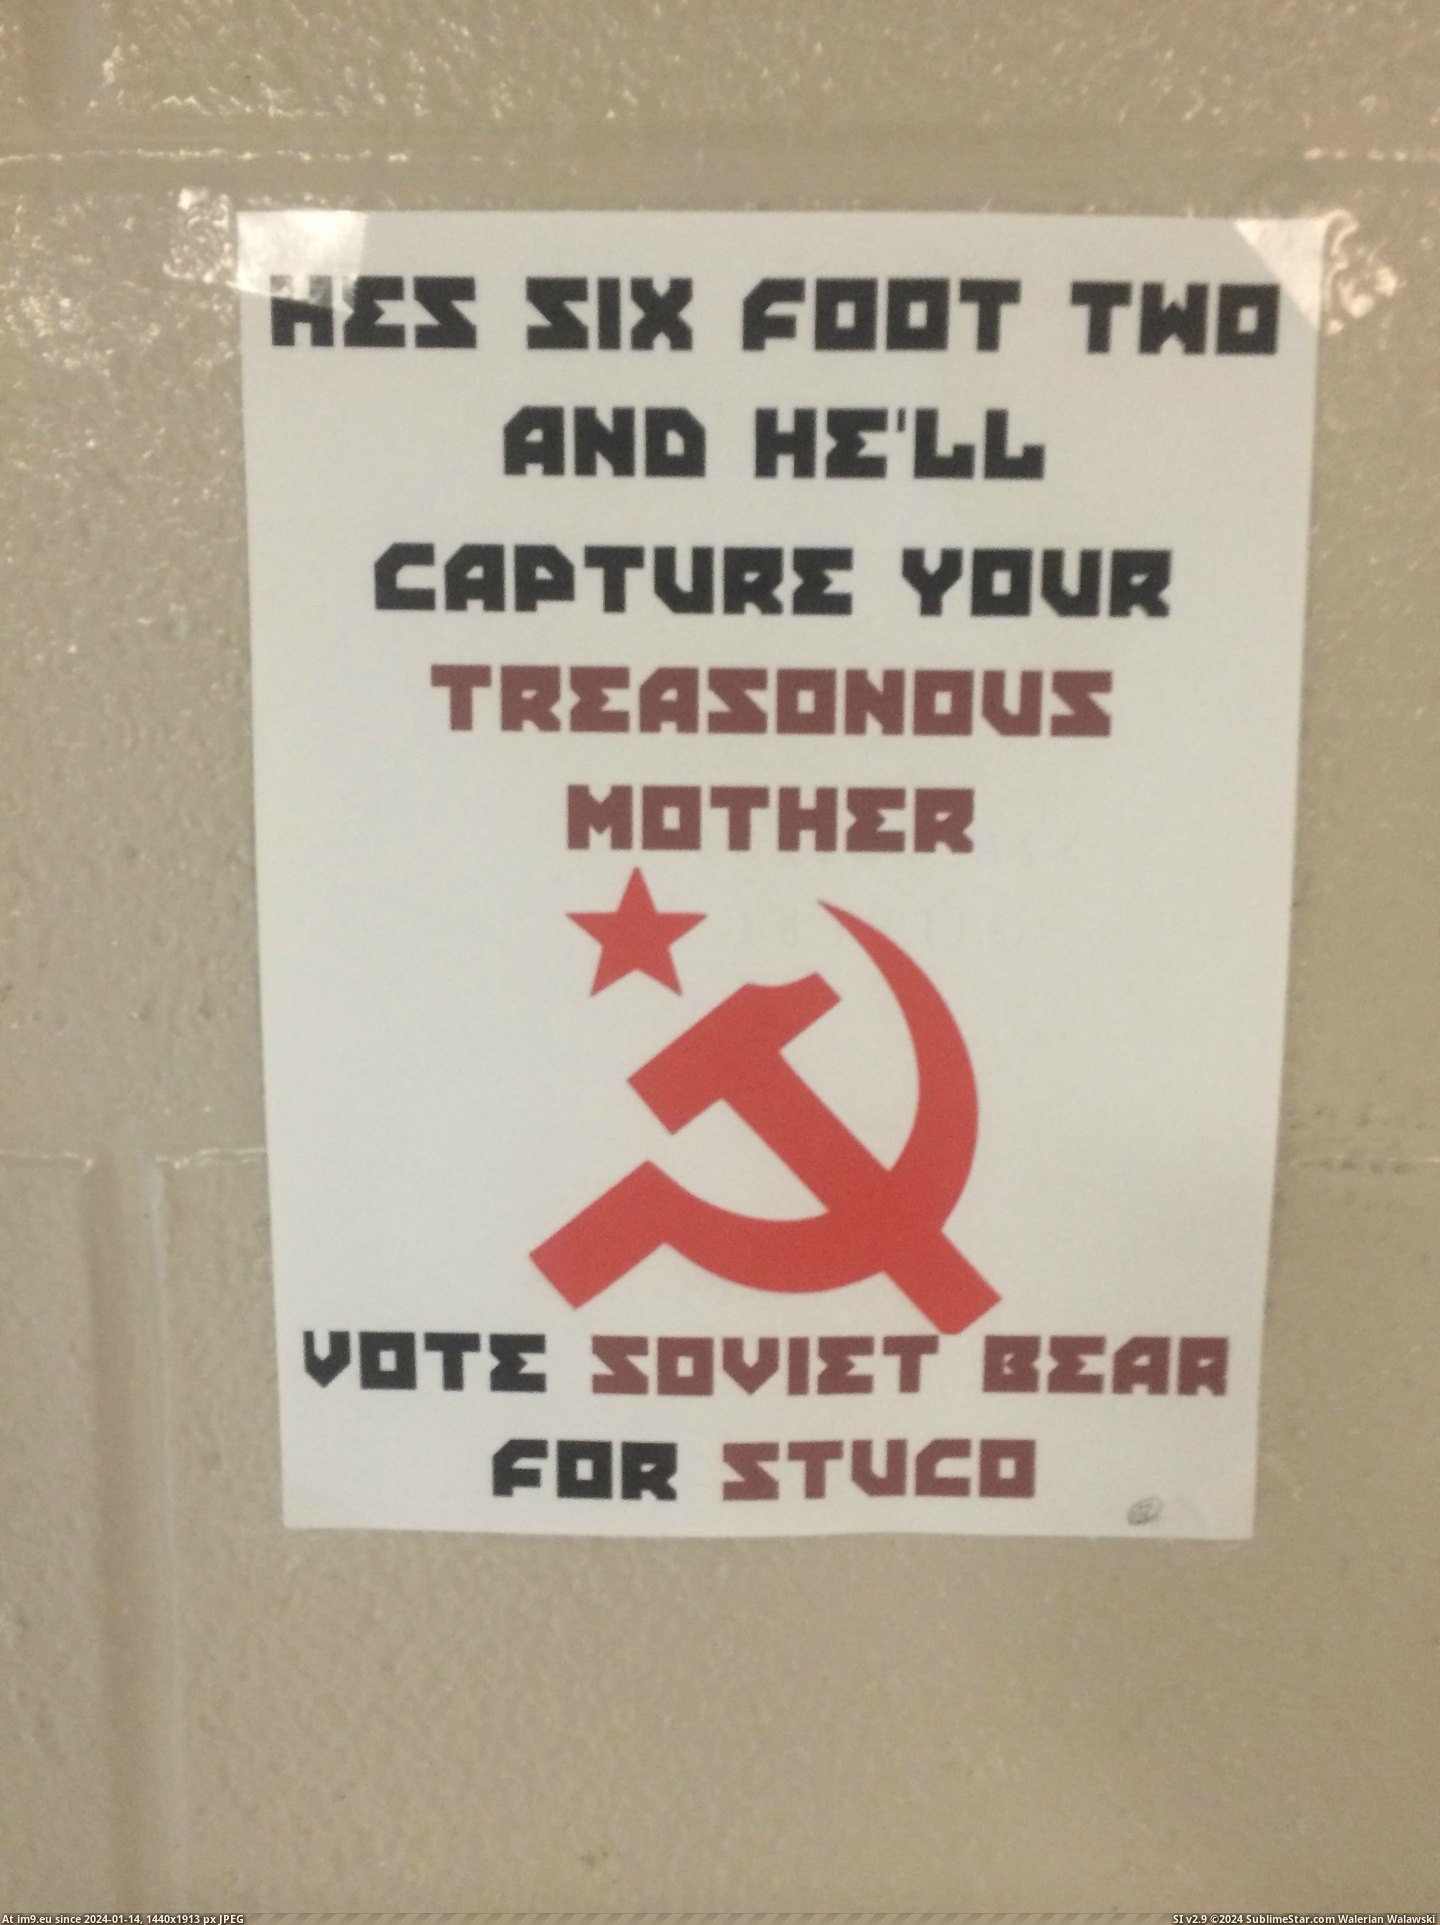 #Funny #School #Decided #Holding #Soviet #Council #Elections #Bear #Student #Run [Funny] So my school is holding elections for student council... and someone has decided to run as Soviet Bear 7 Pic. (Image of album My r/FUNNY favs))